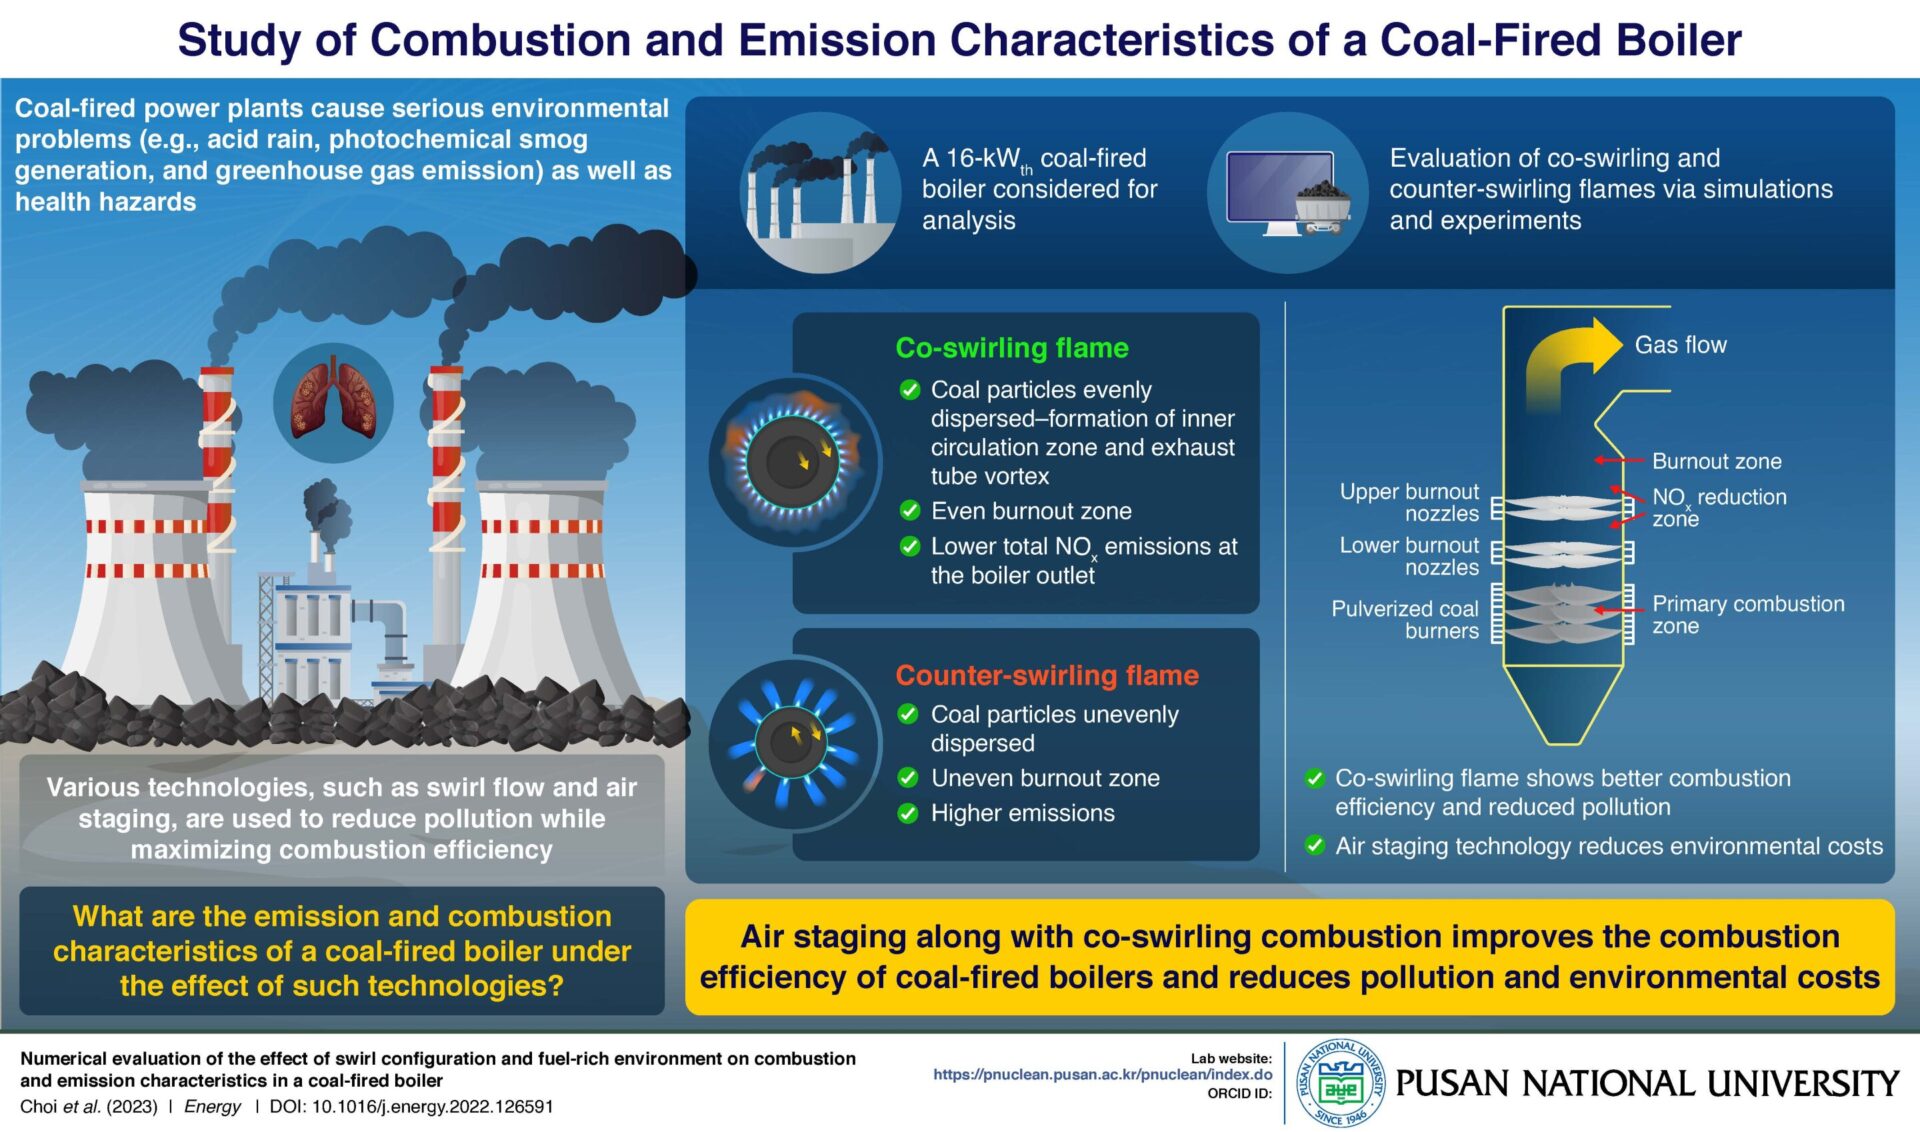 Study of combustion and emission characteristics of a coal-fired boiler